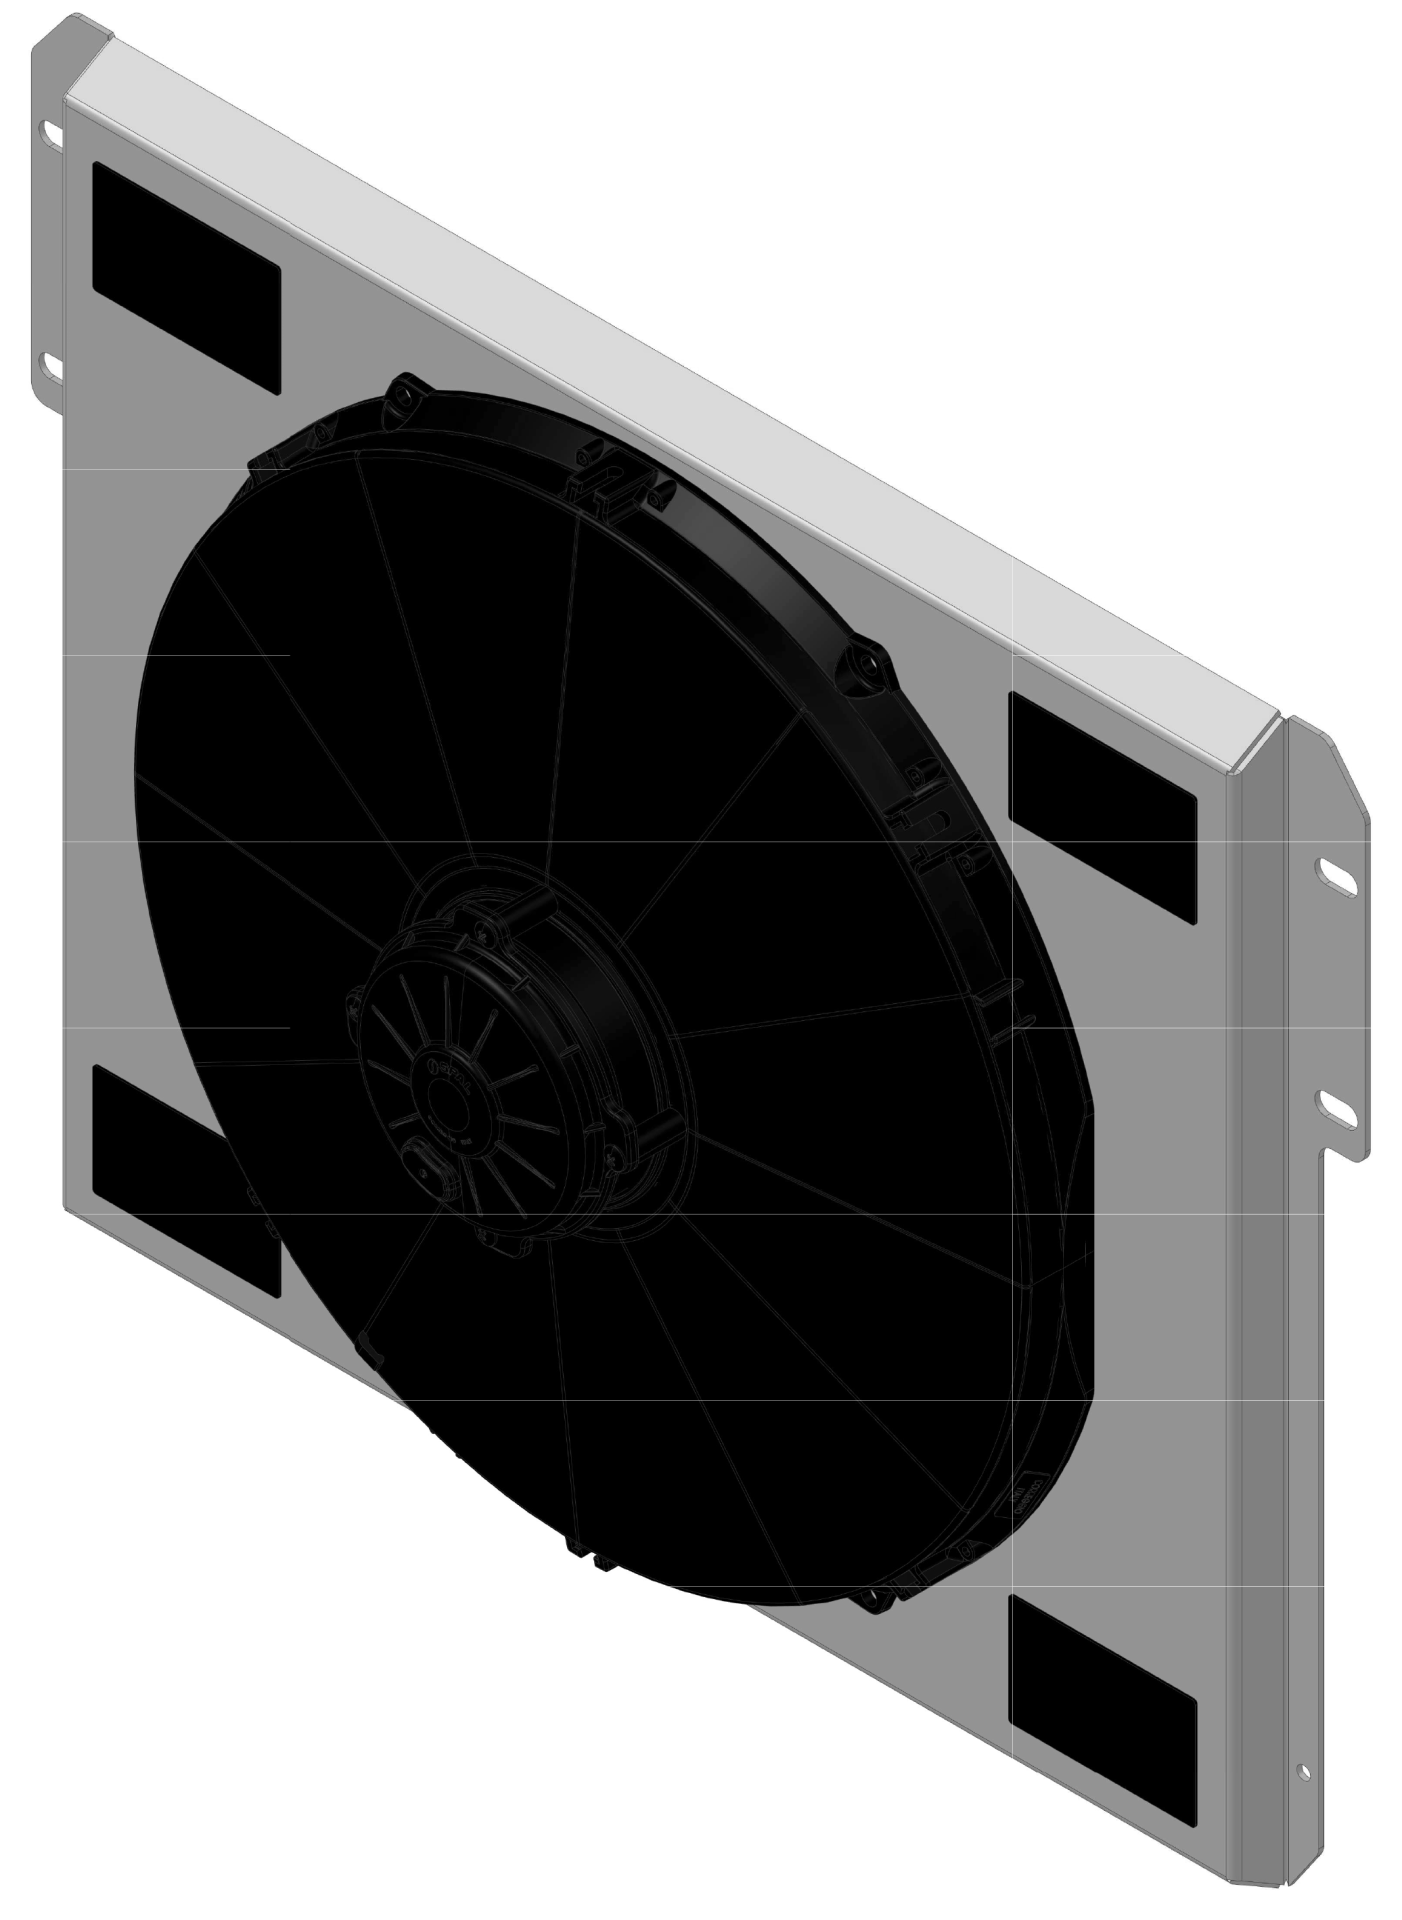 Wizard Cooling Inc - 1955-1957 Ford Thunderbird- Shroud Mounted Fan - HIGH Profile